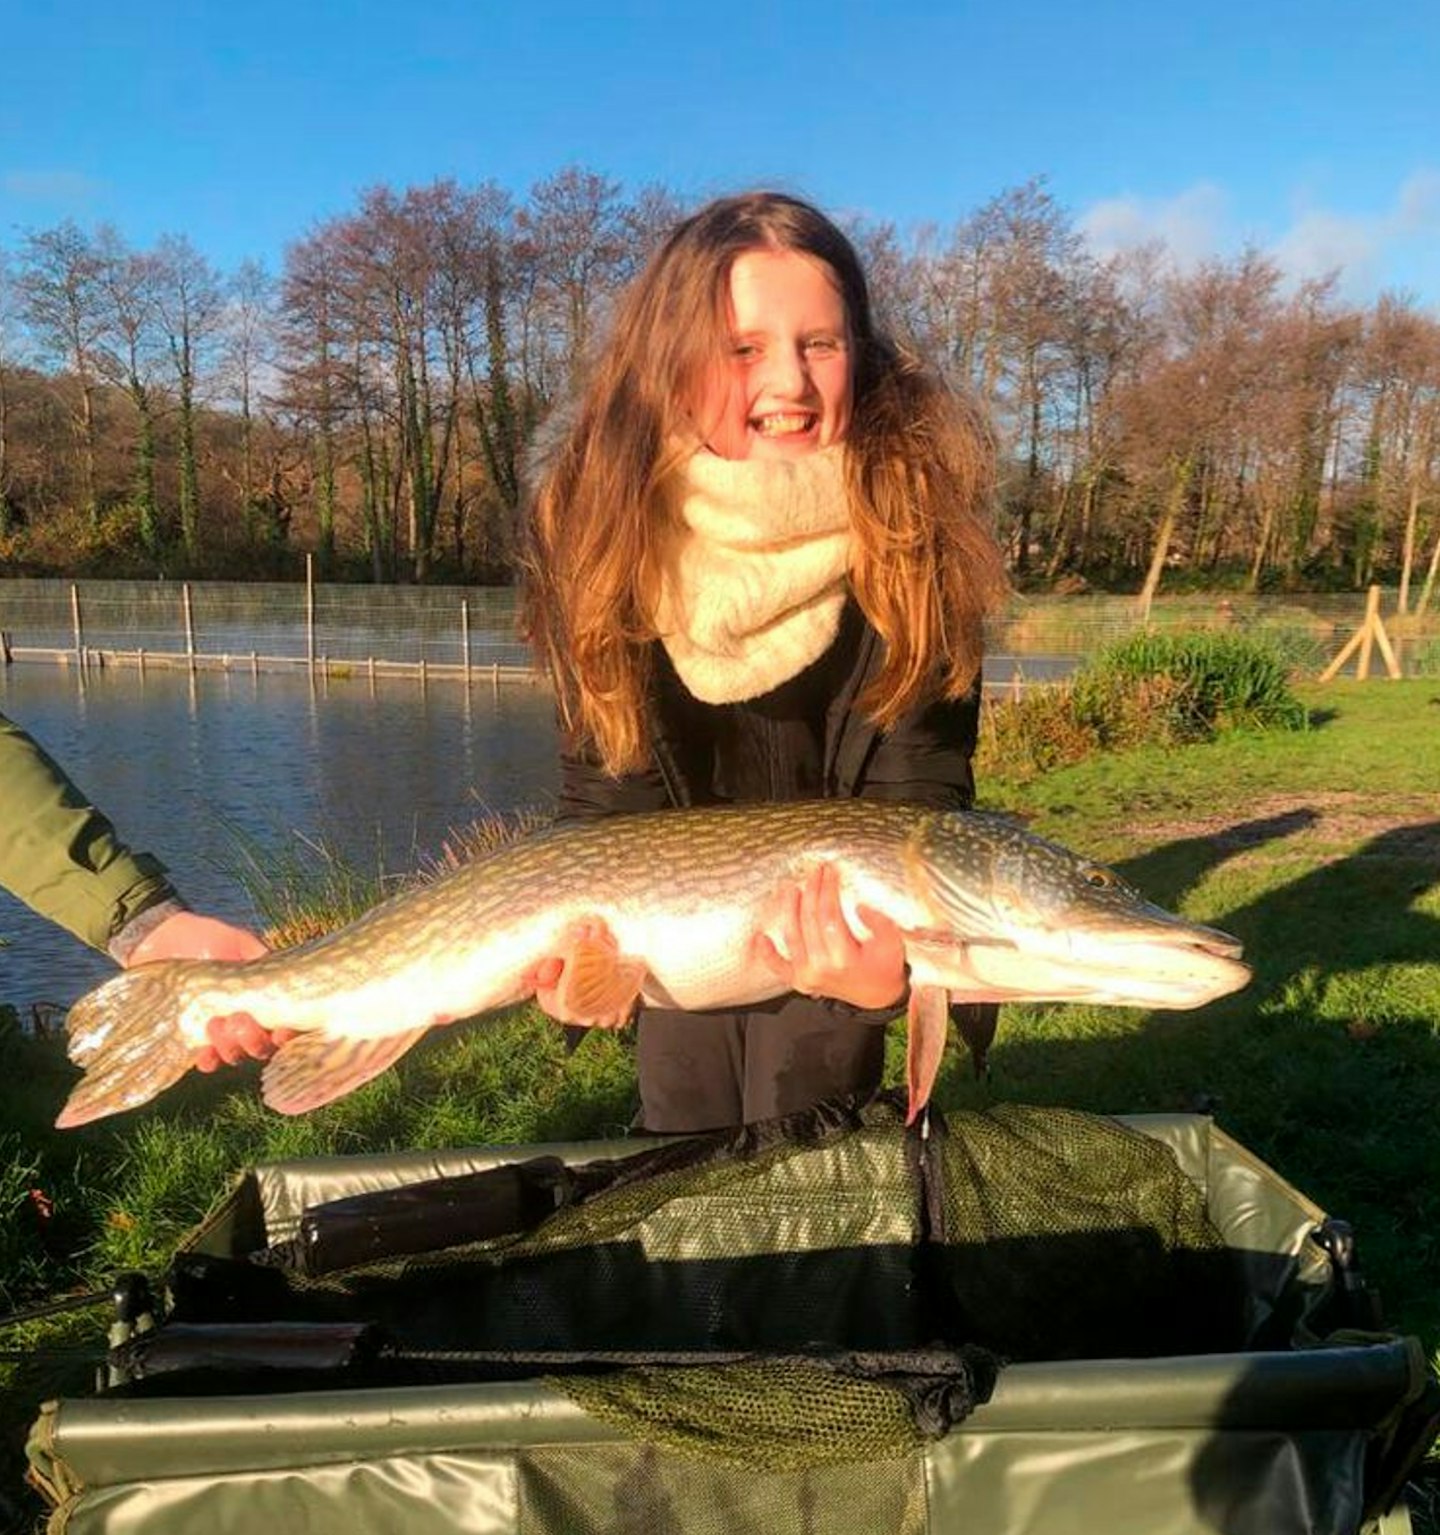 11-year-old Erin Wilson banked this 25lb 5oz pike on her very first cast